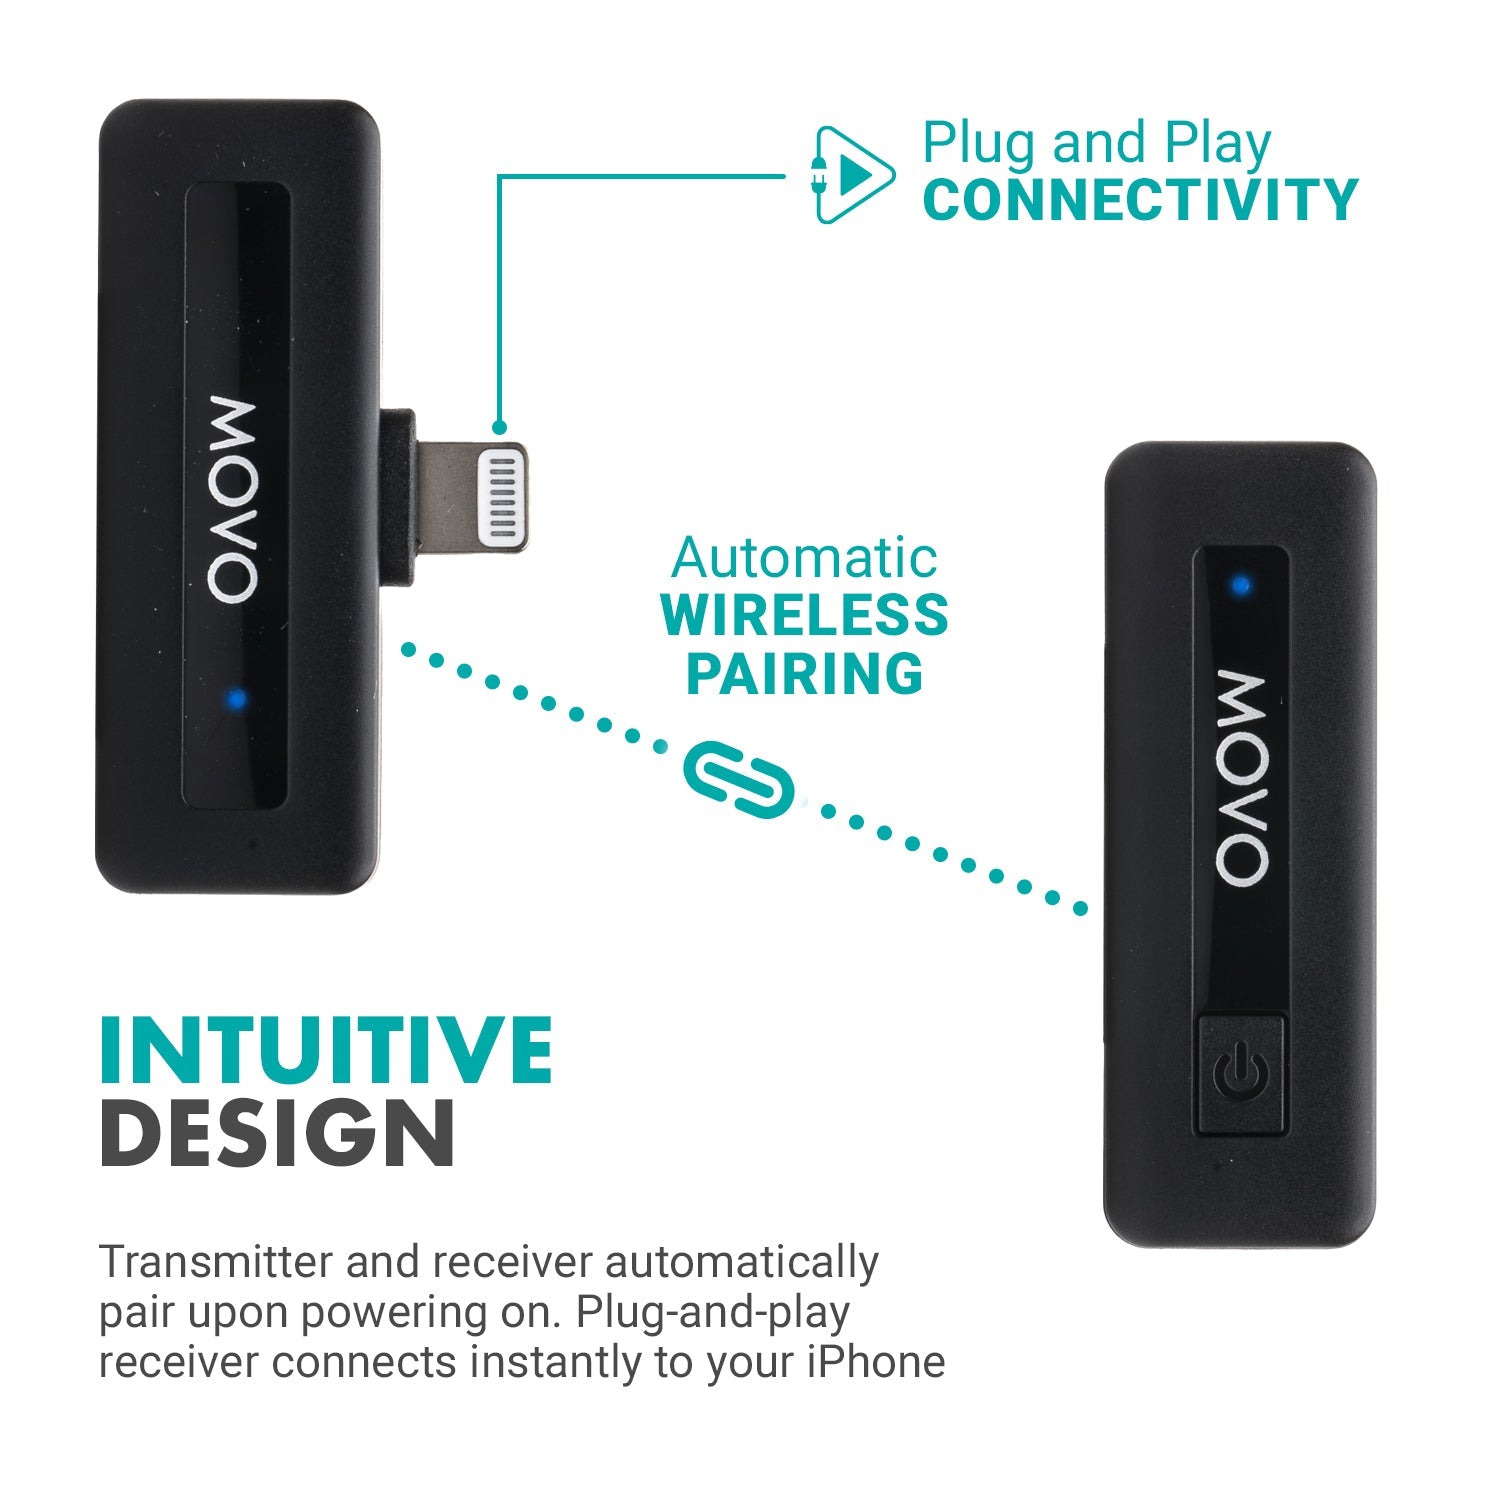 EDGE-DI-DUO, Dual Wireless Microphone System for iPhone